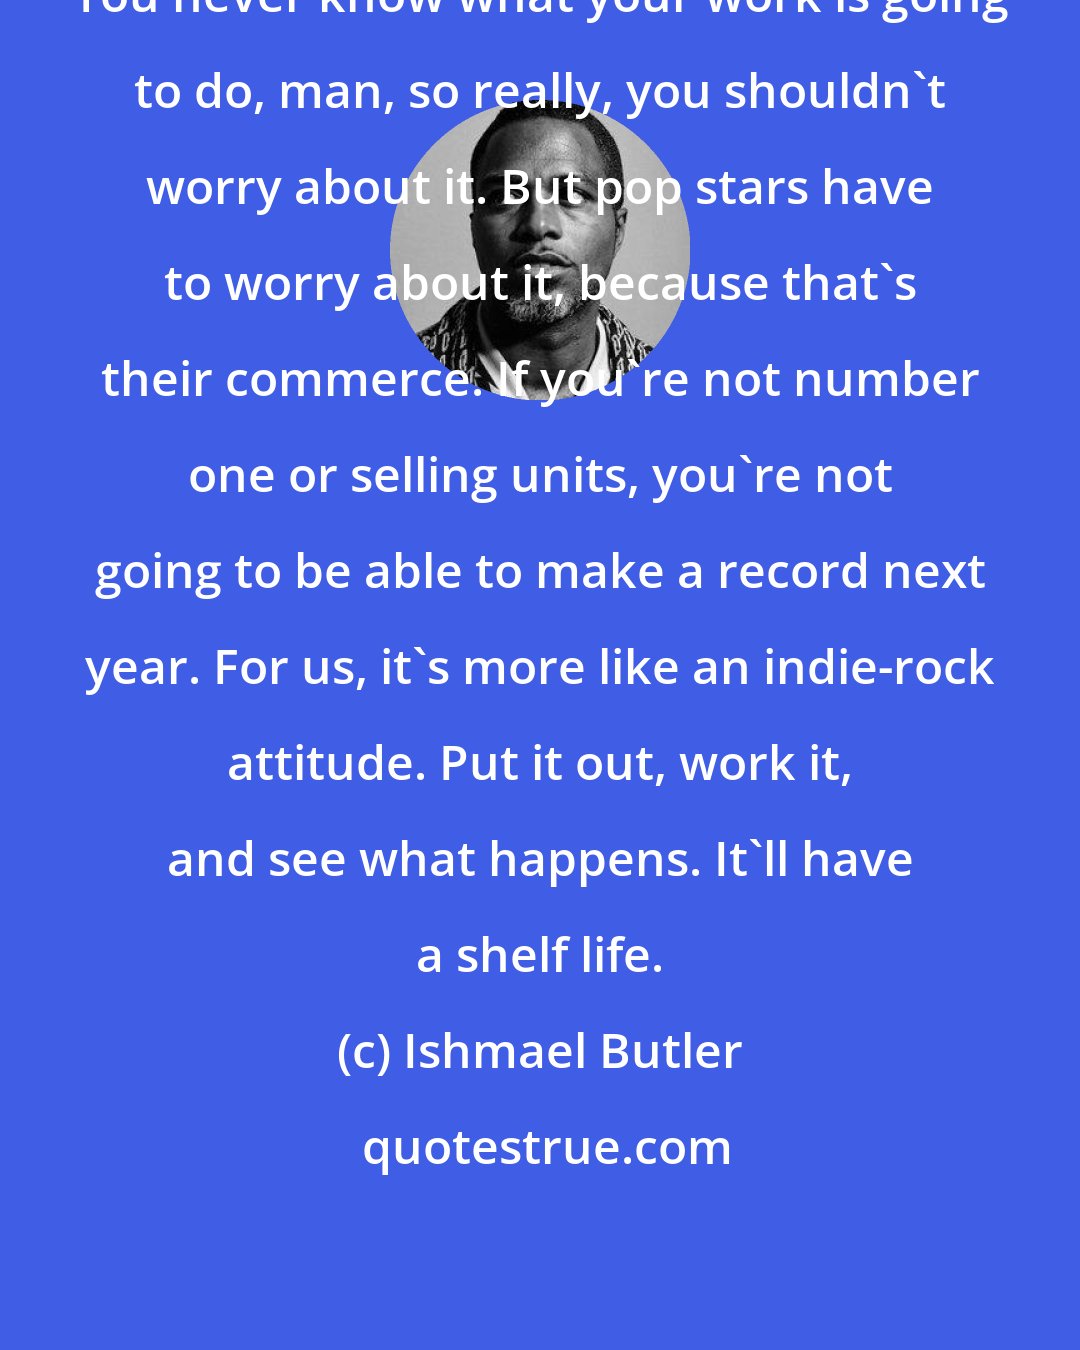 Ishmael Butler: You never know what your work is going to do, man, so really, you shouldn't worry about it. But pop stars have to worry about it, because that's their commerce. If you're not number one or selling units, you're not going to be able to make a record next year. For us, it's more like an indie-rock attitude. Put it out, work it, and see what happens. It'll have a shelf life.